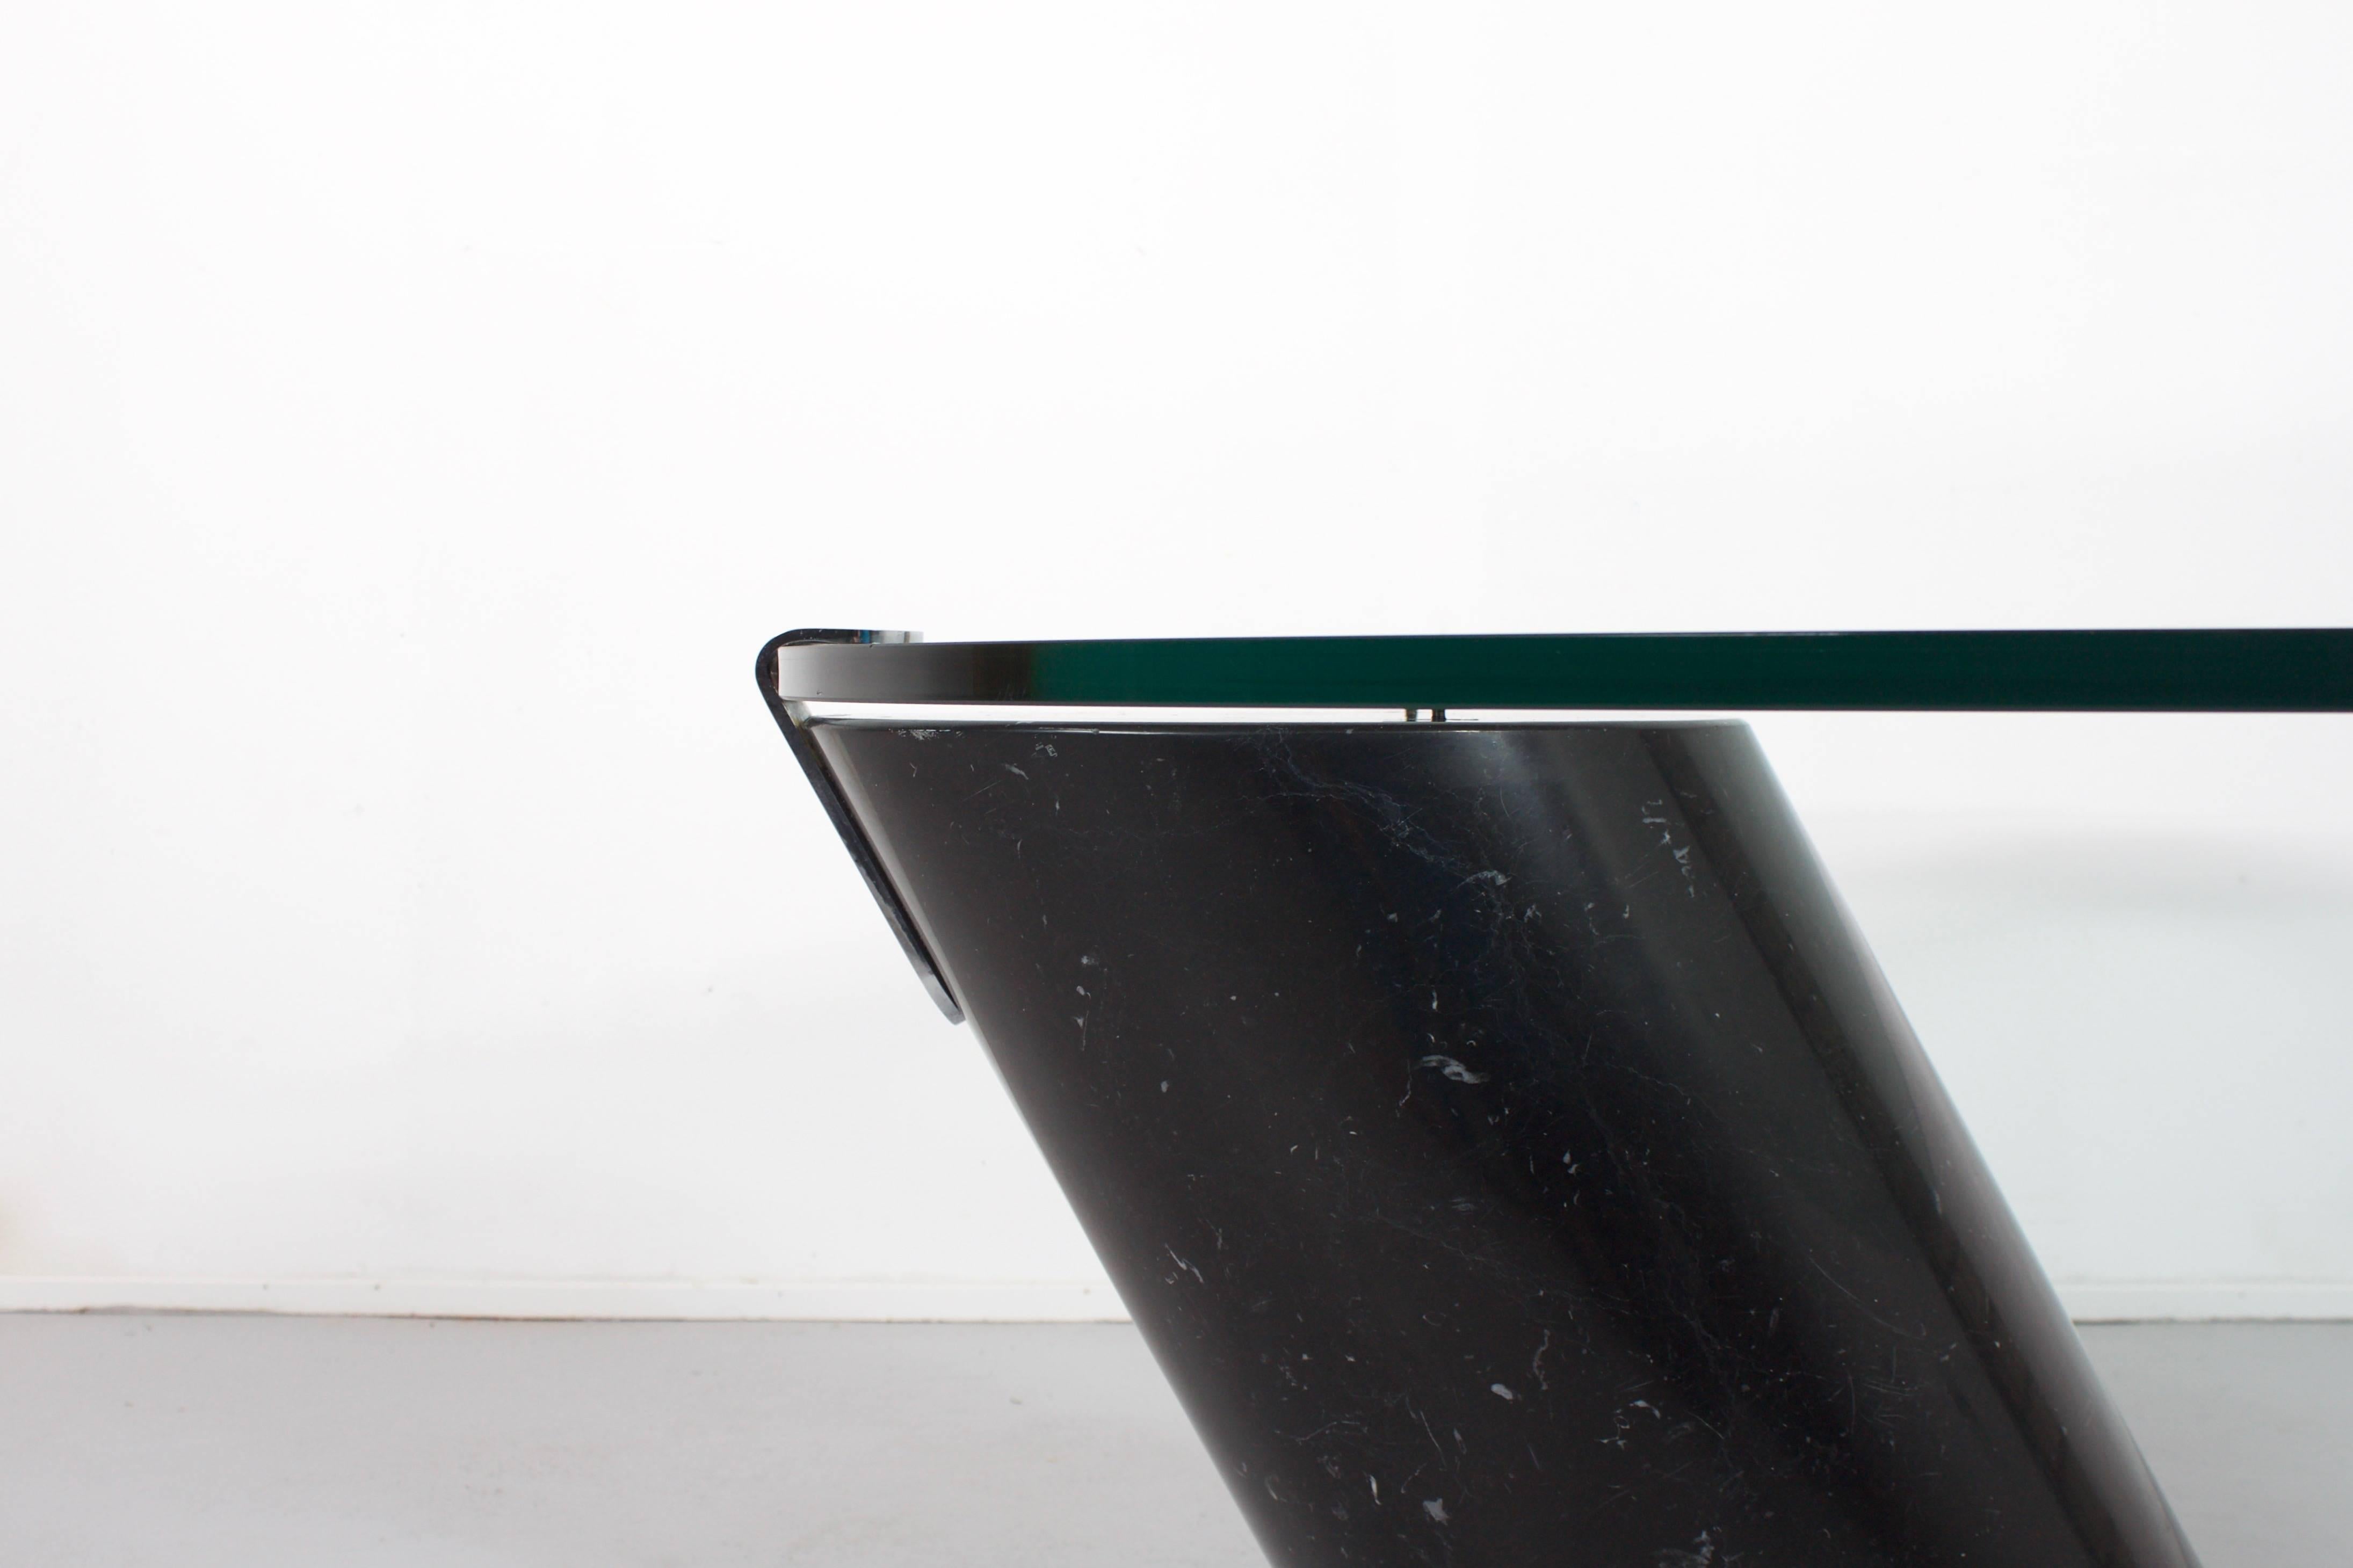 Asymmetric coffee table by Team Form AG for Ronald Schmitt, Switzerland

The base of this table is made from solid 'Nero Marquina’ marble and a thick oval glass top 

The top lays loose on the marble base only held in to place by a chromed metal lip